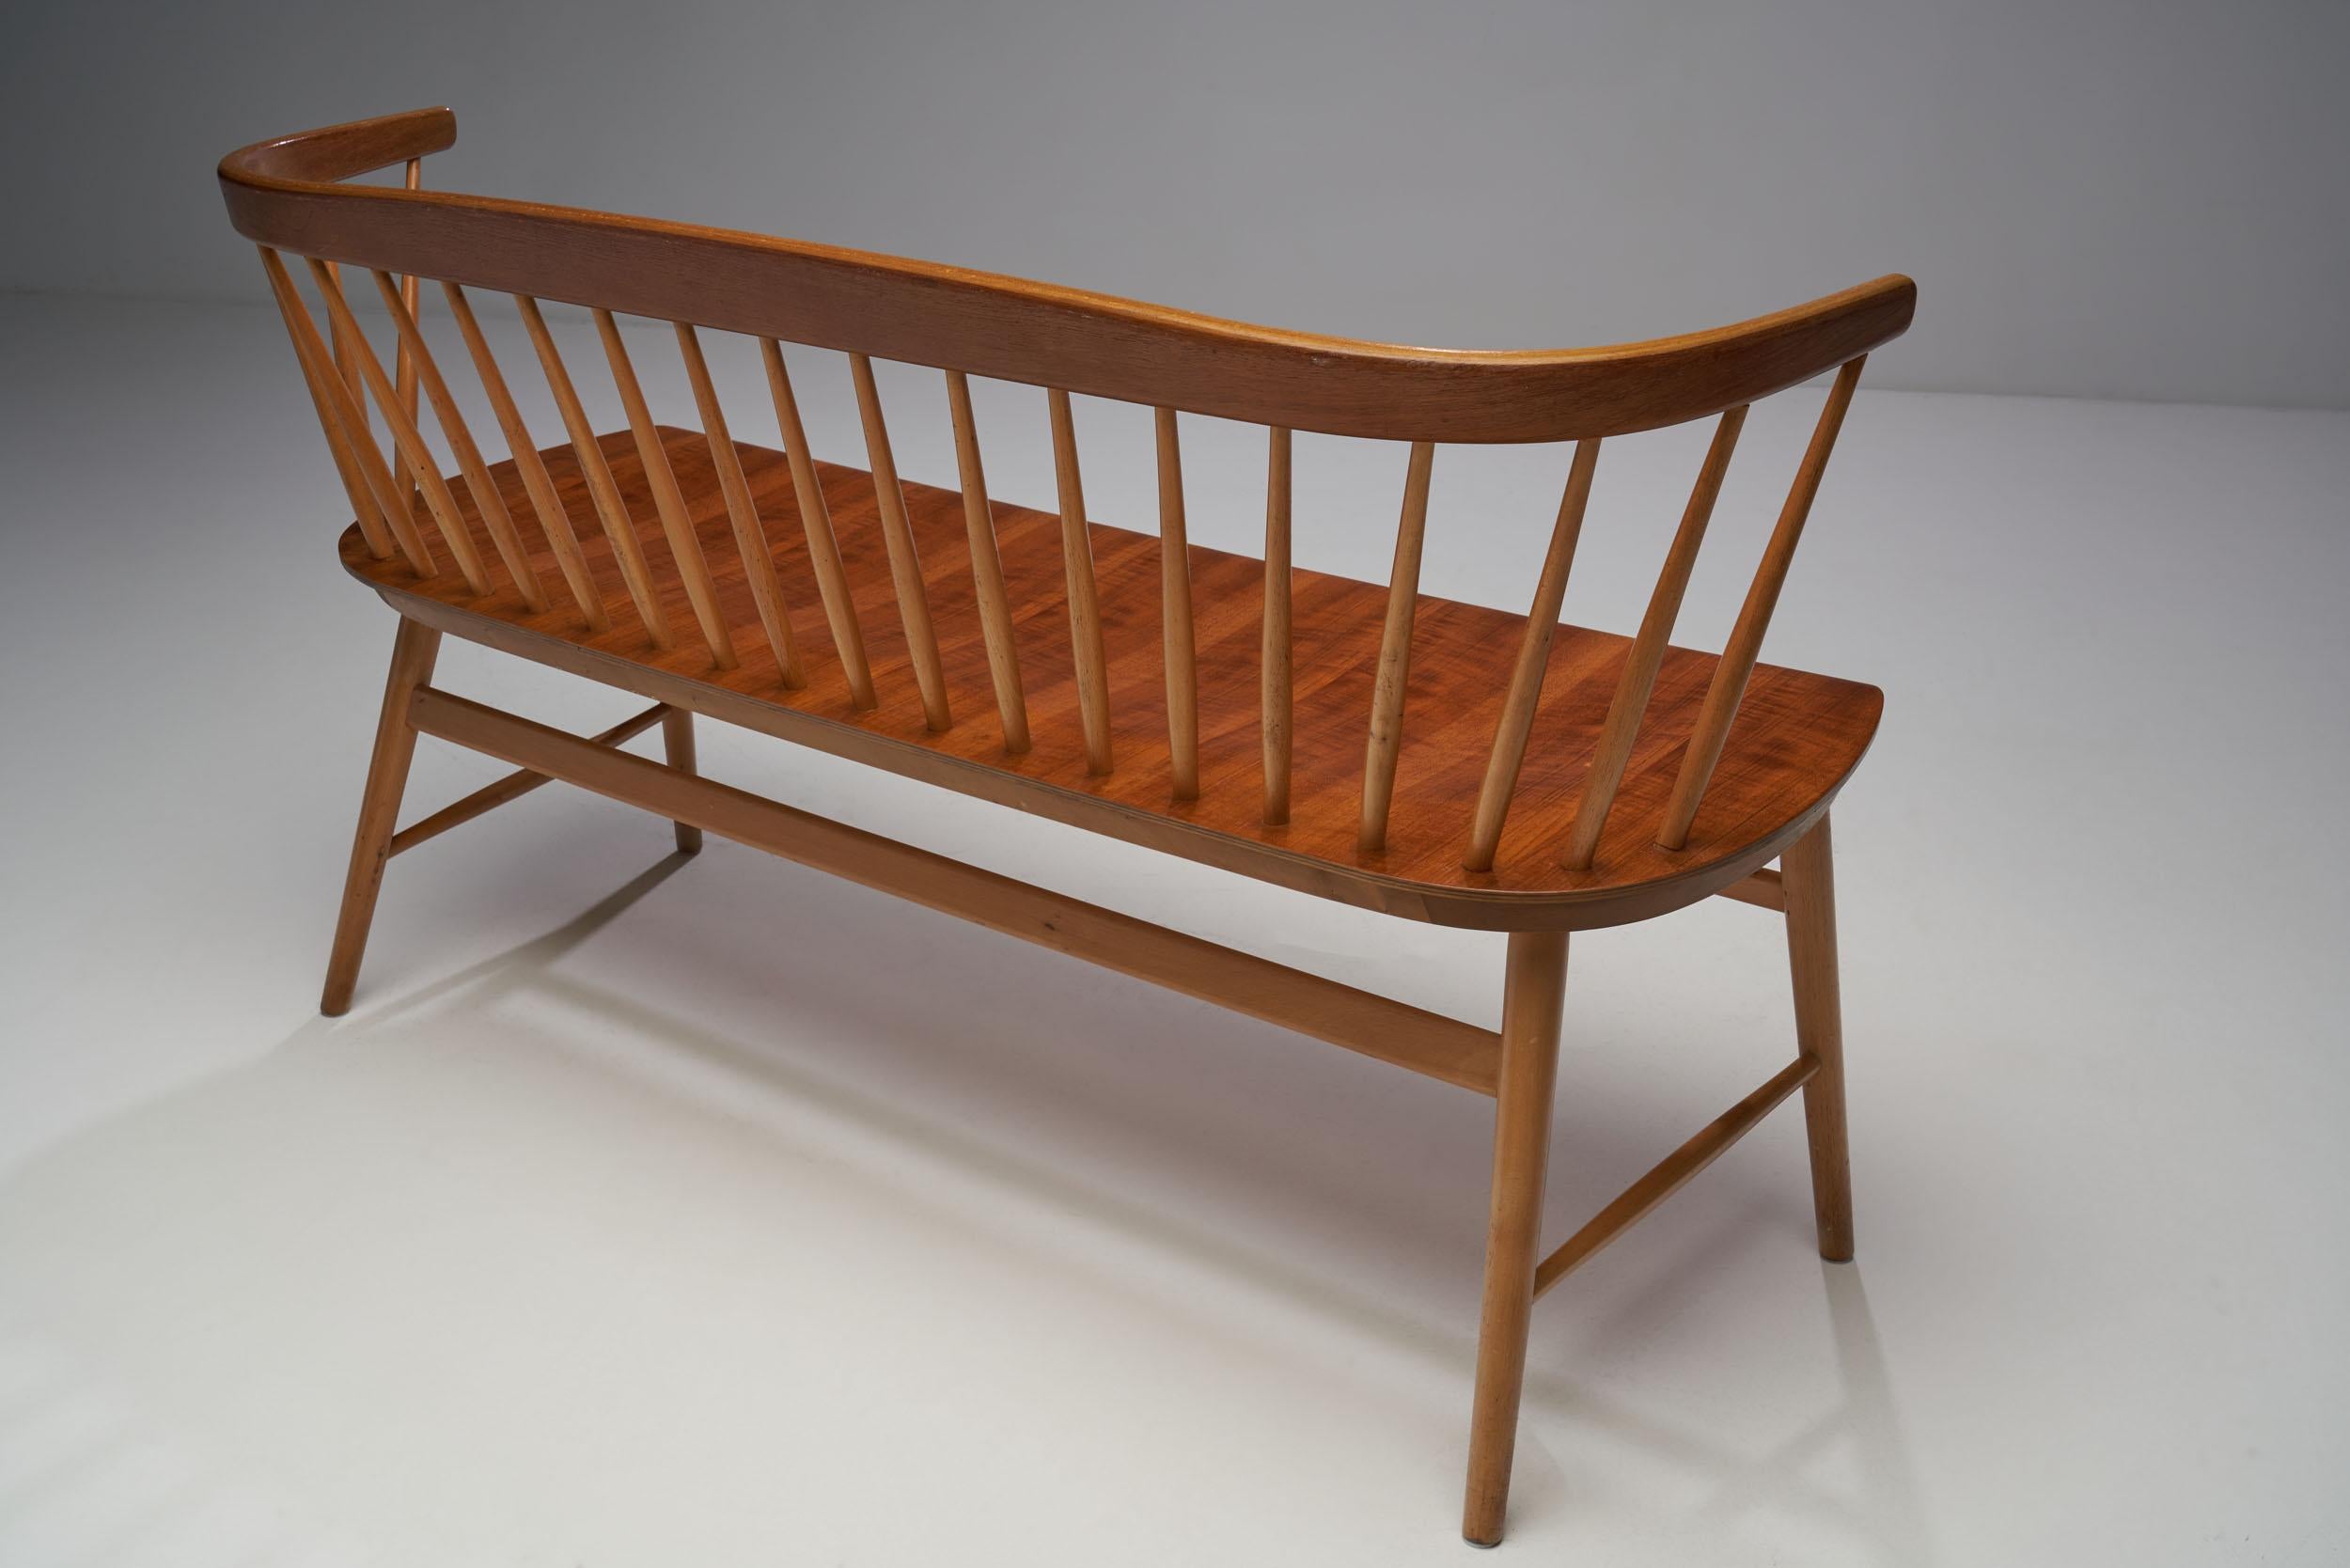 Wood “Florida” Bench by Ebbe Wigell, Sweden, 1950s